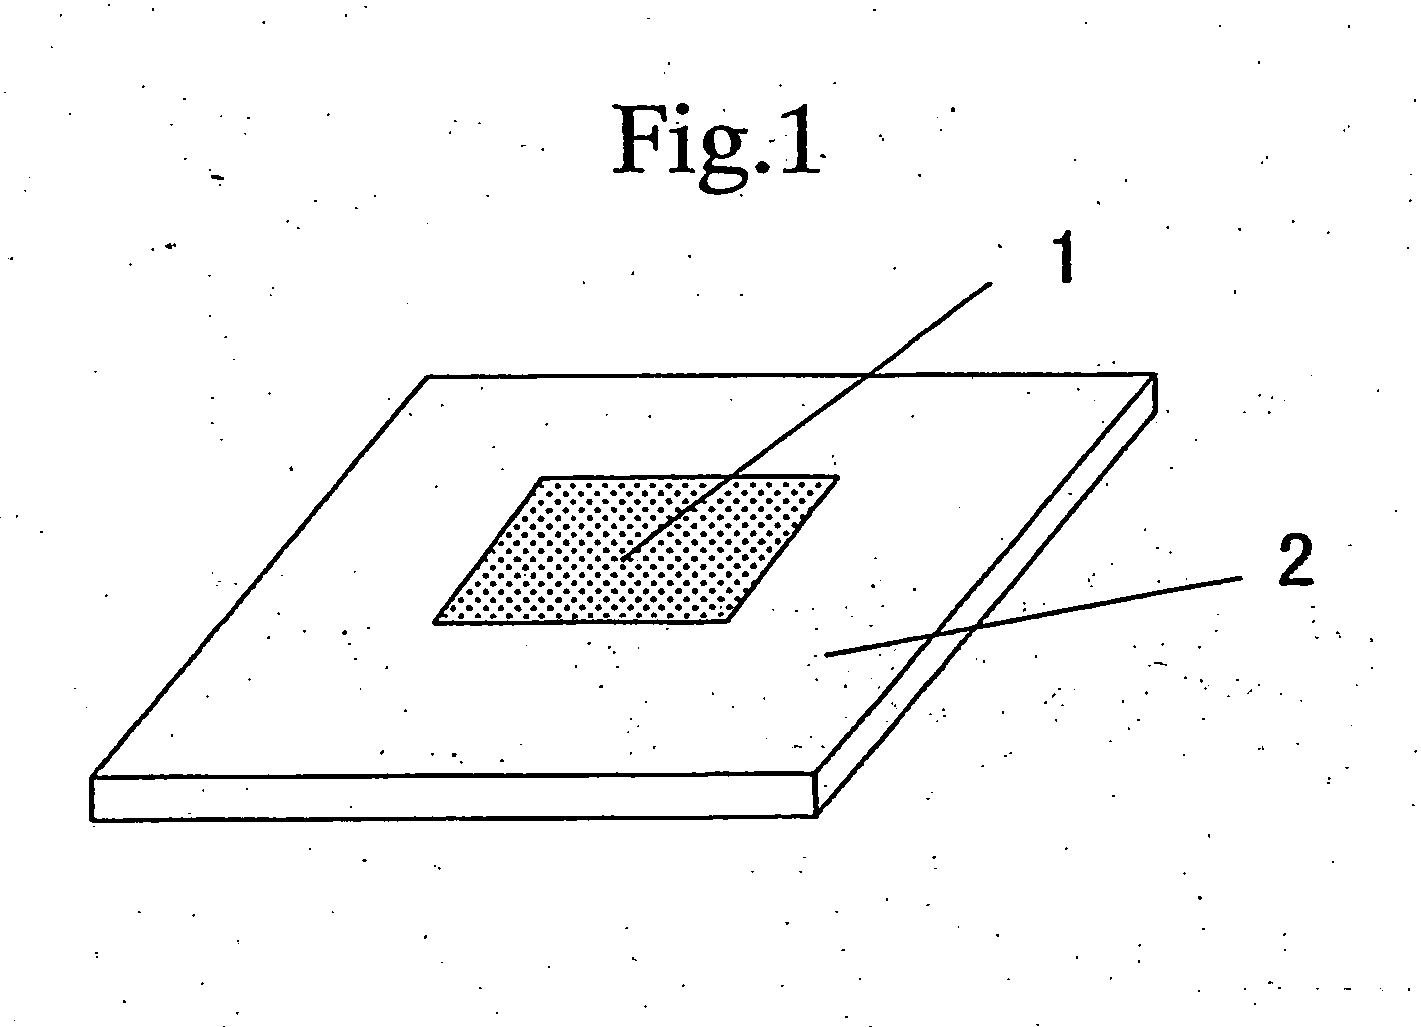 Polymer electrolyte as well as polymer electrolyte membrane, membrane electrode assembly and polymer electrolyte fuel cell using the same